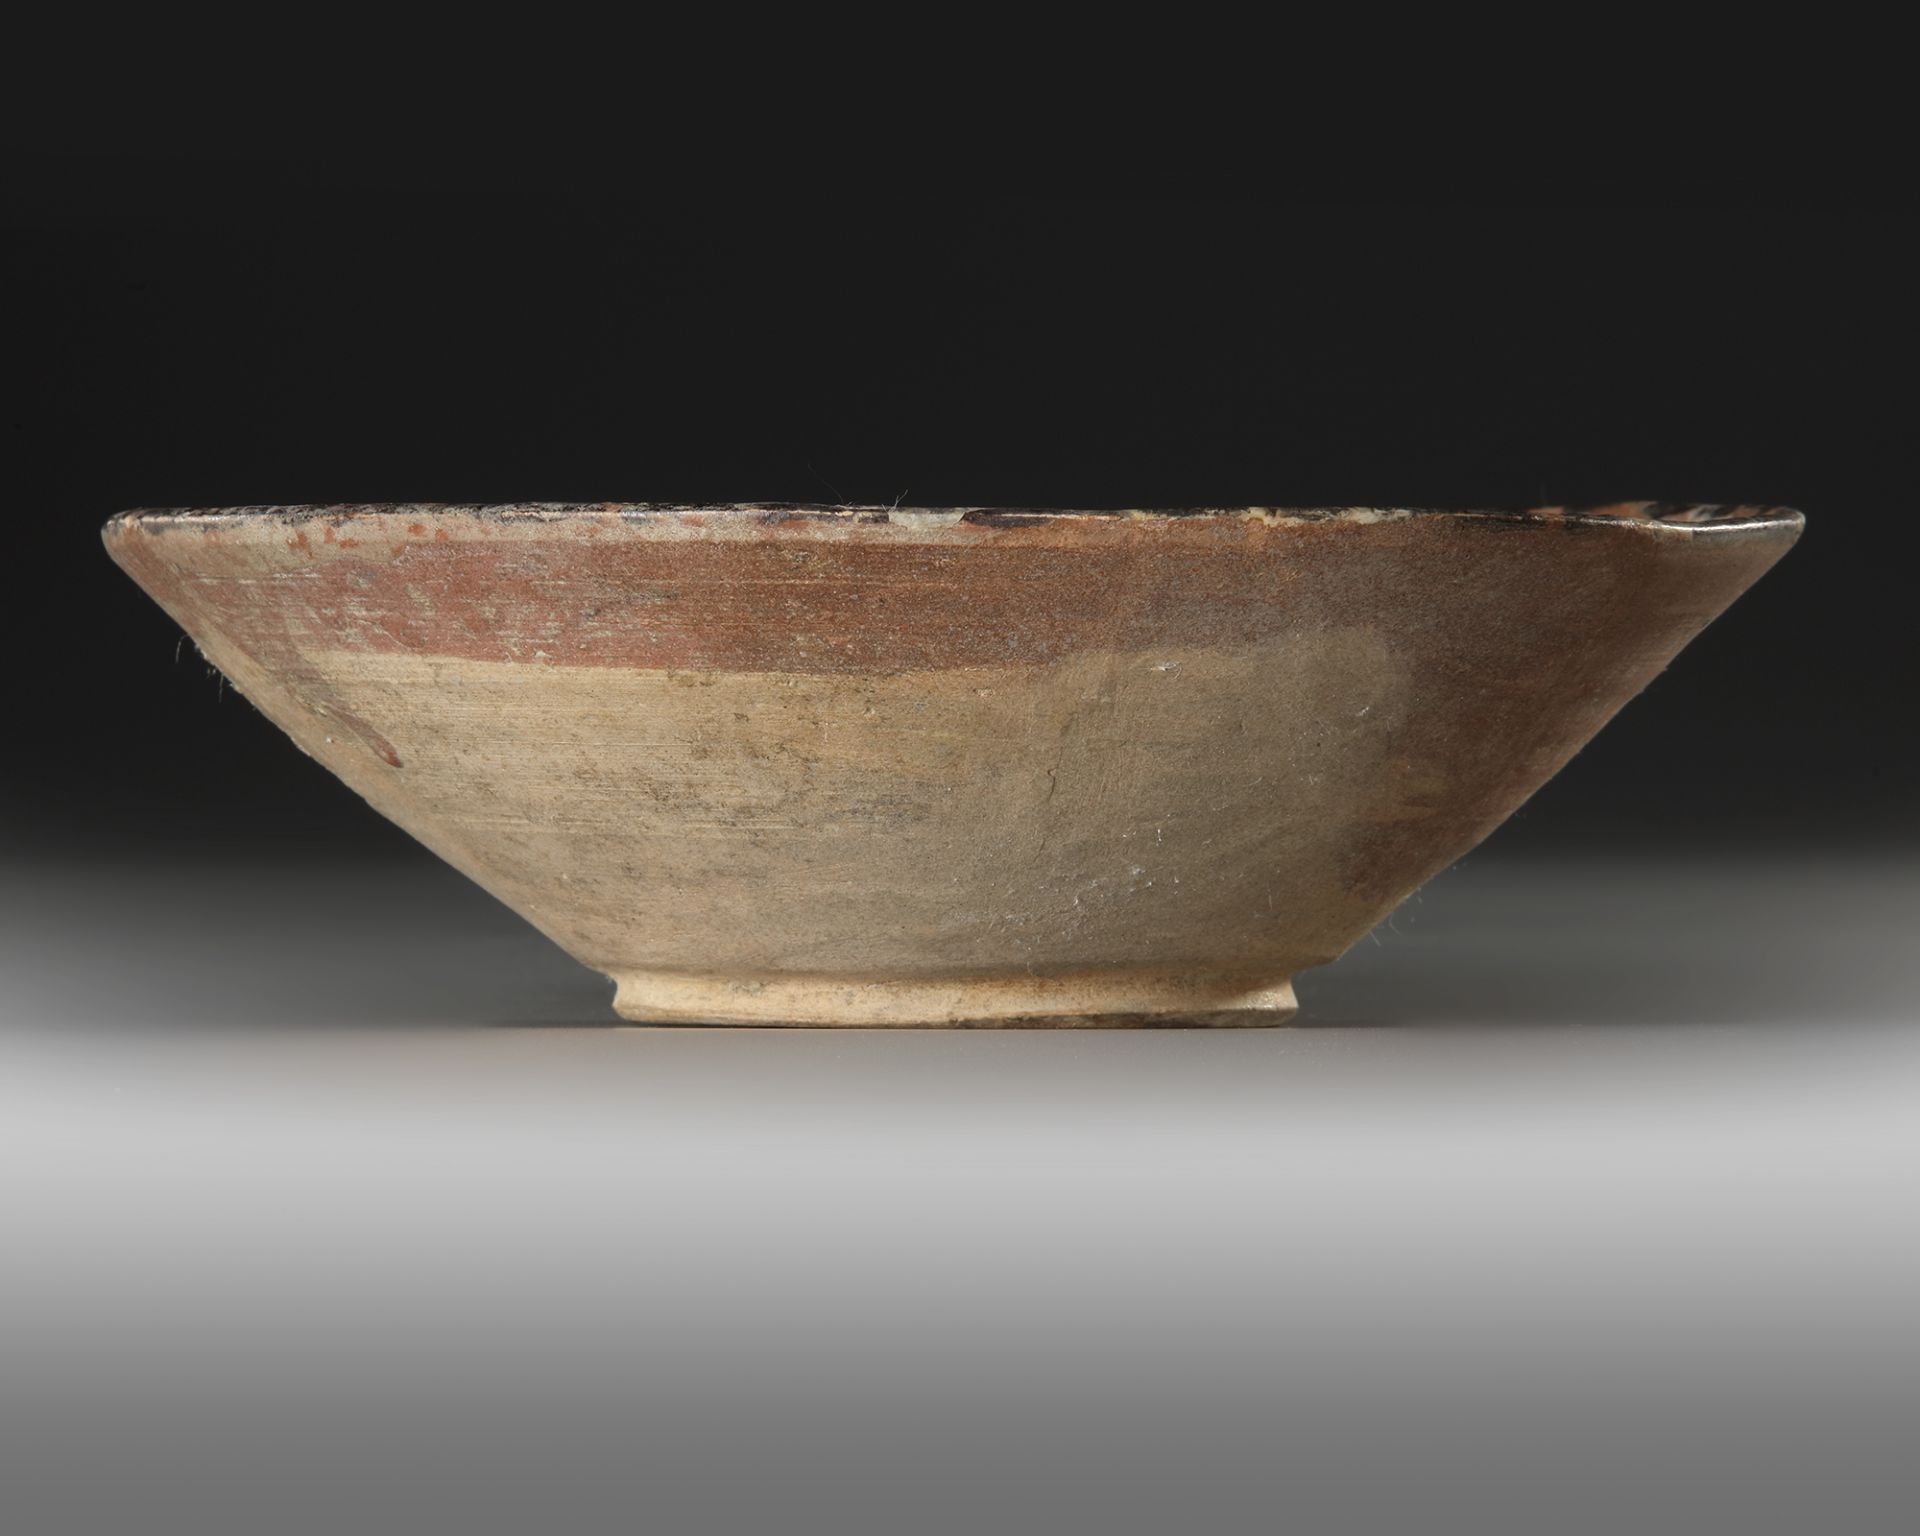 A NISHAPUR CONICAL POTTERY BOWL, PERSIA, 10TH CENTURY - Image 6 of 10